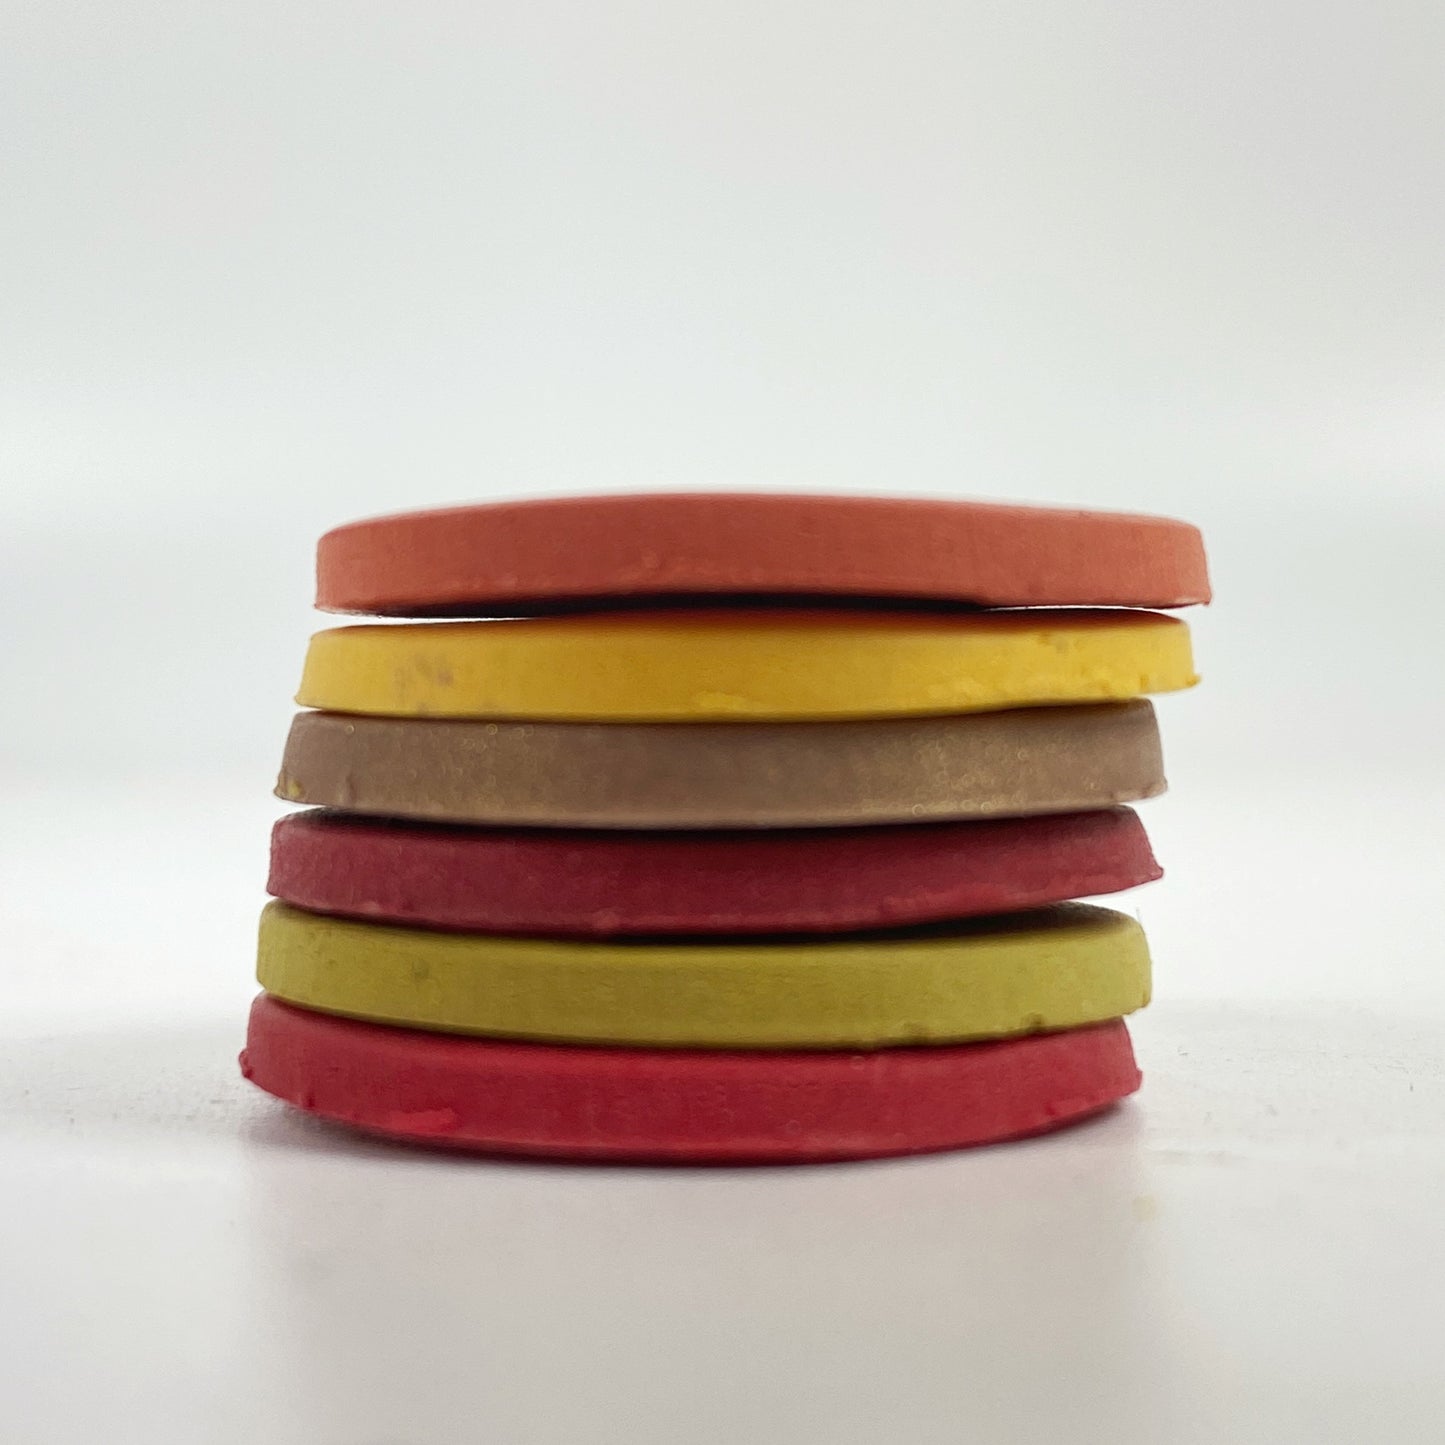 Polymer Clay Spice Market color sample discs in a stack